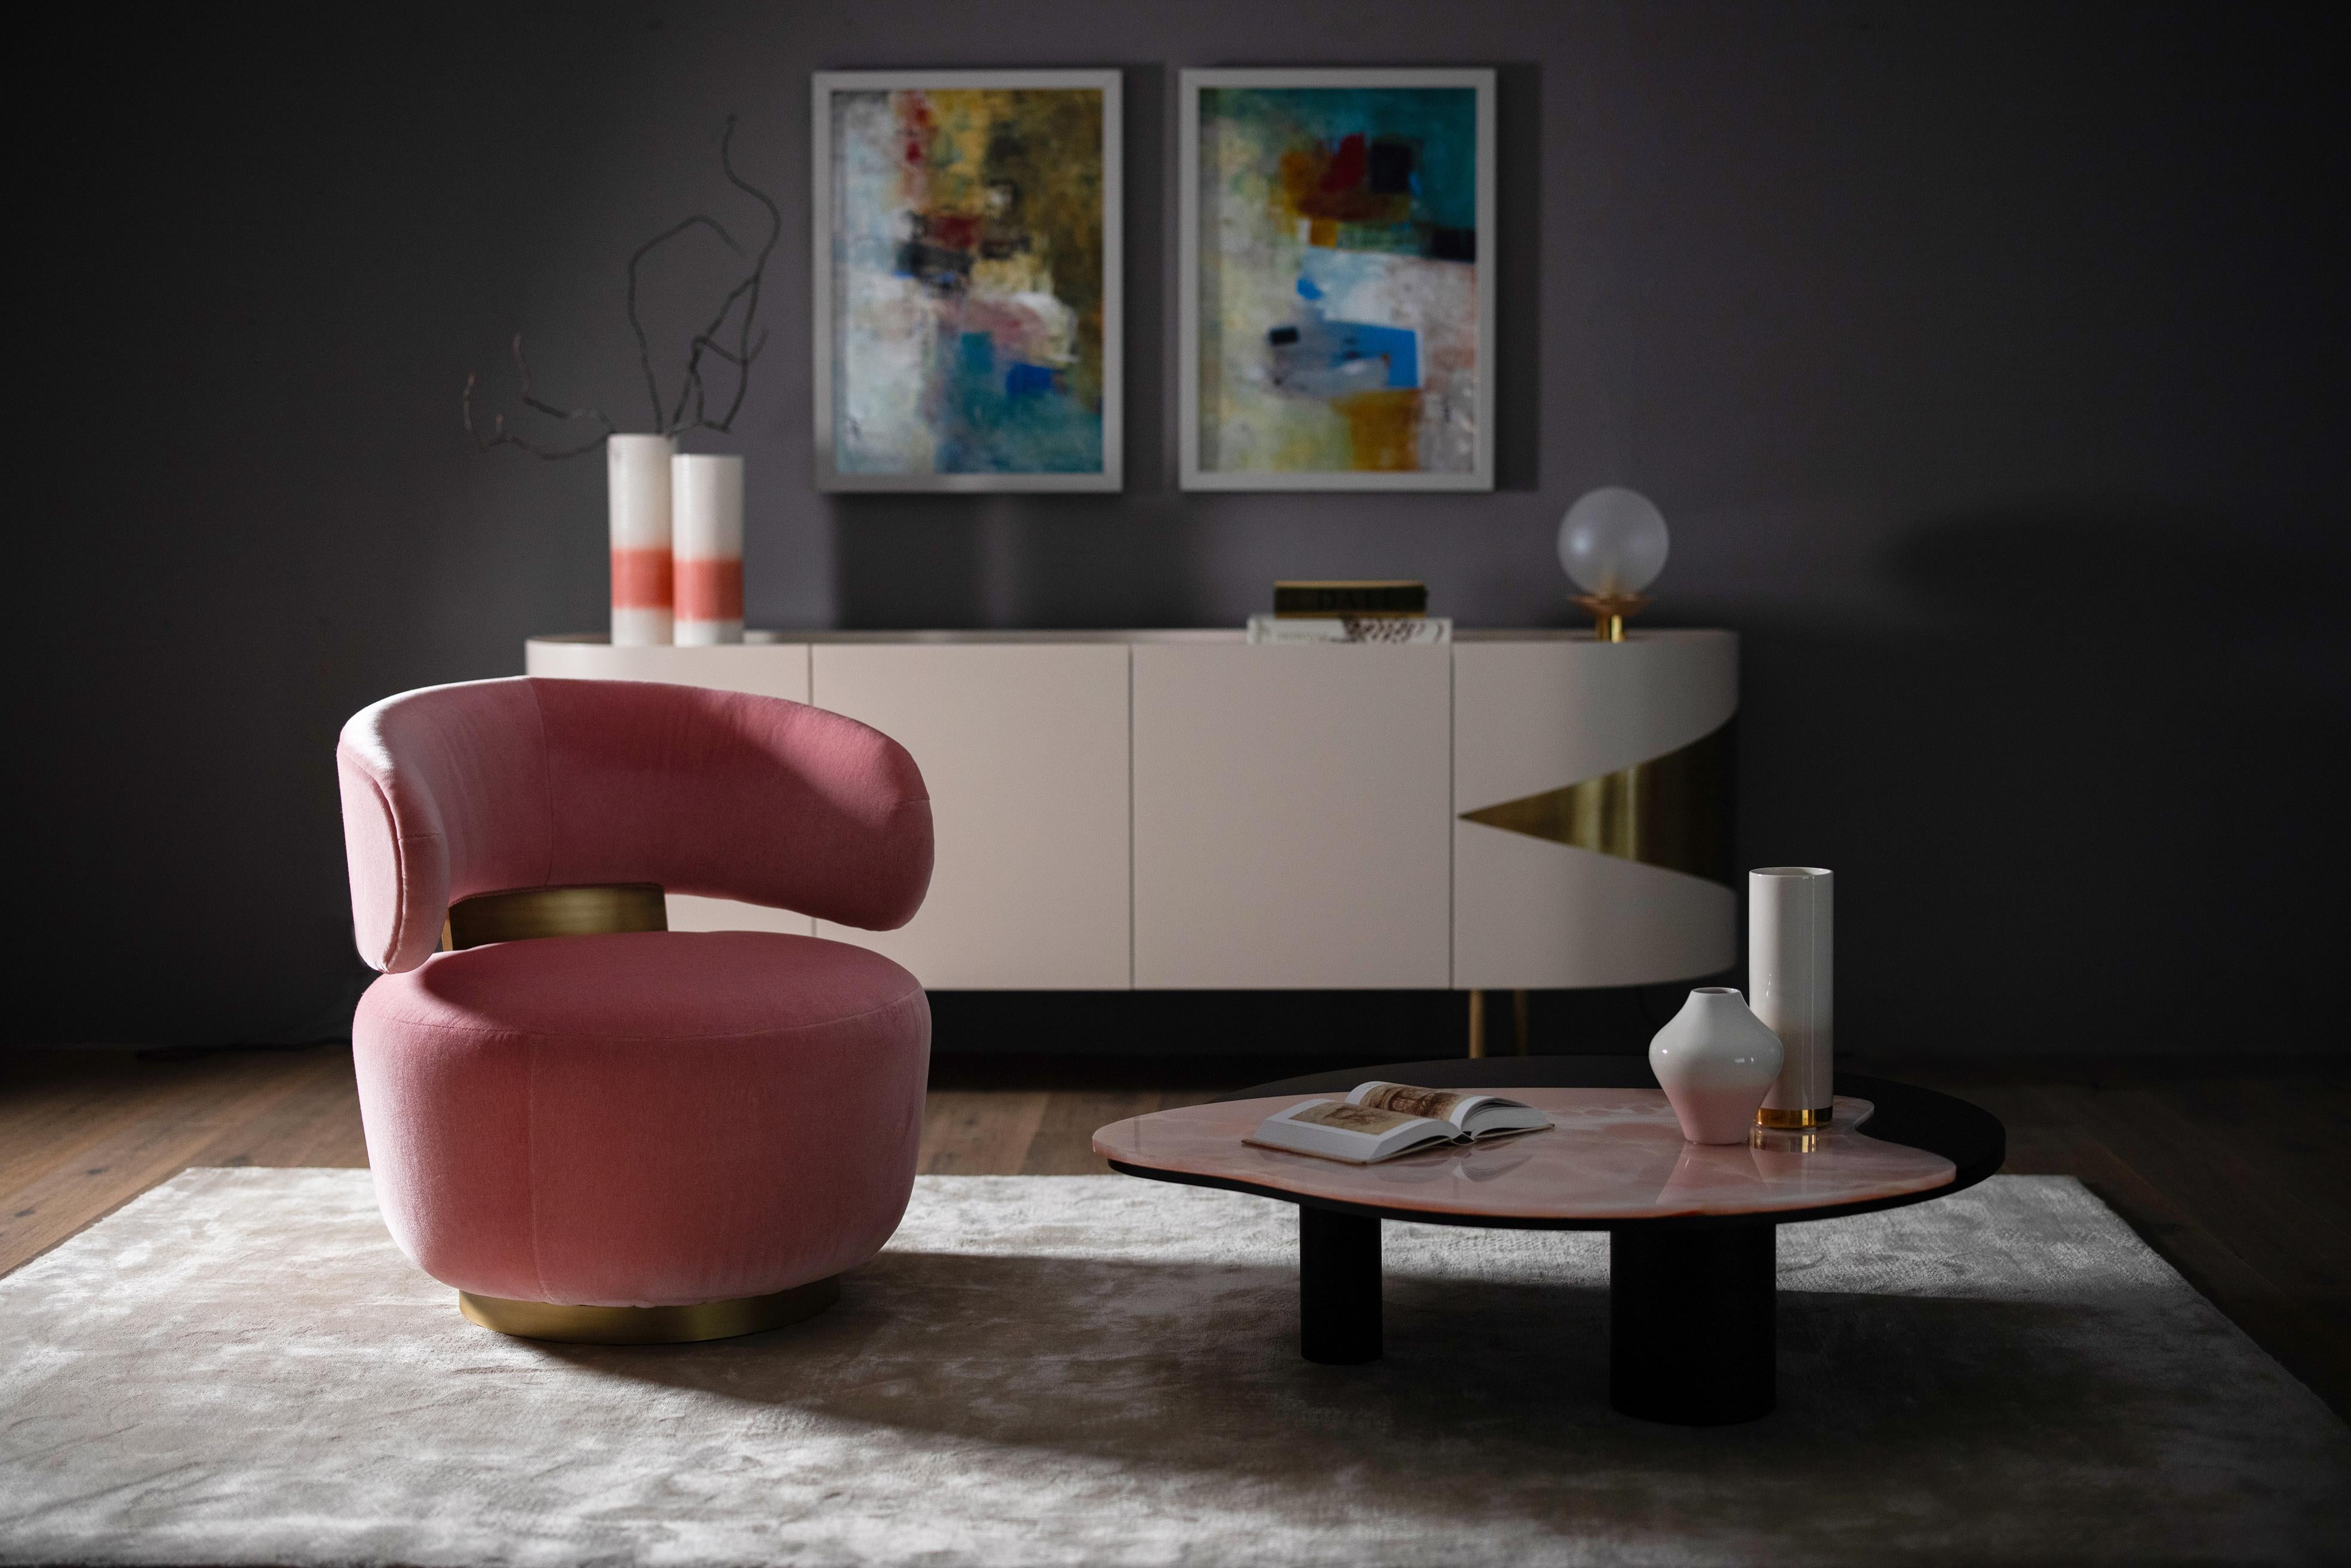 Caju Swivel Lounge Chair, Contemporary Collection, Handcrafted in Portugal - Europe by Greenapple.

The Caju lounge chair stands as a trendy furniture piece that personifies the organic shape of a cashew. Upholstered in Pink velvet, the design of